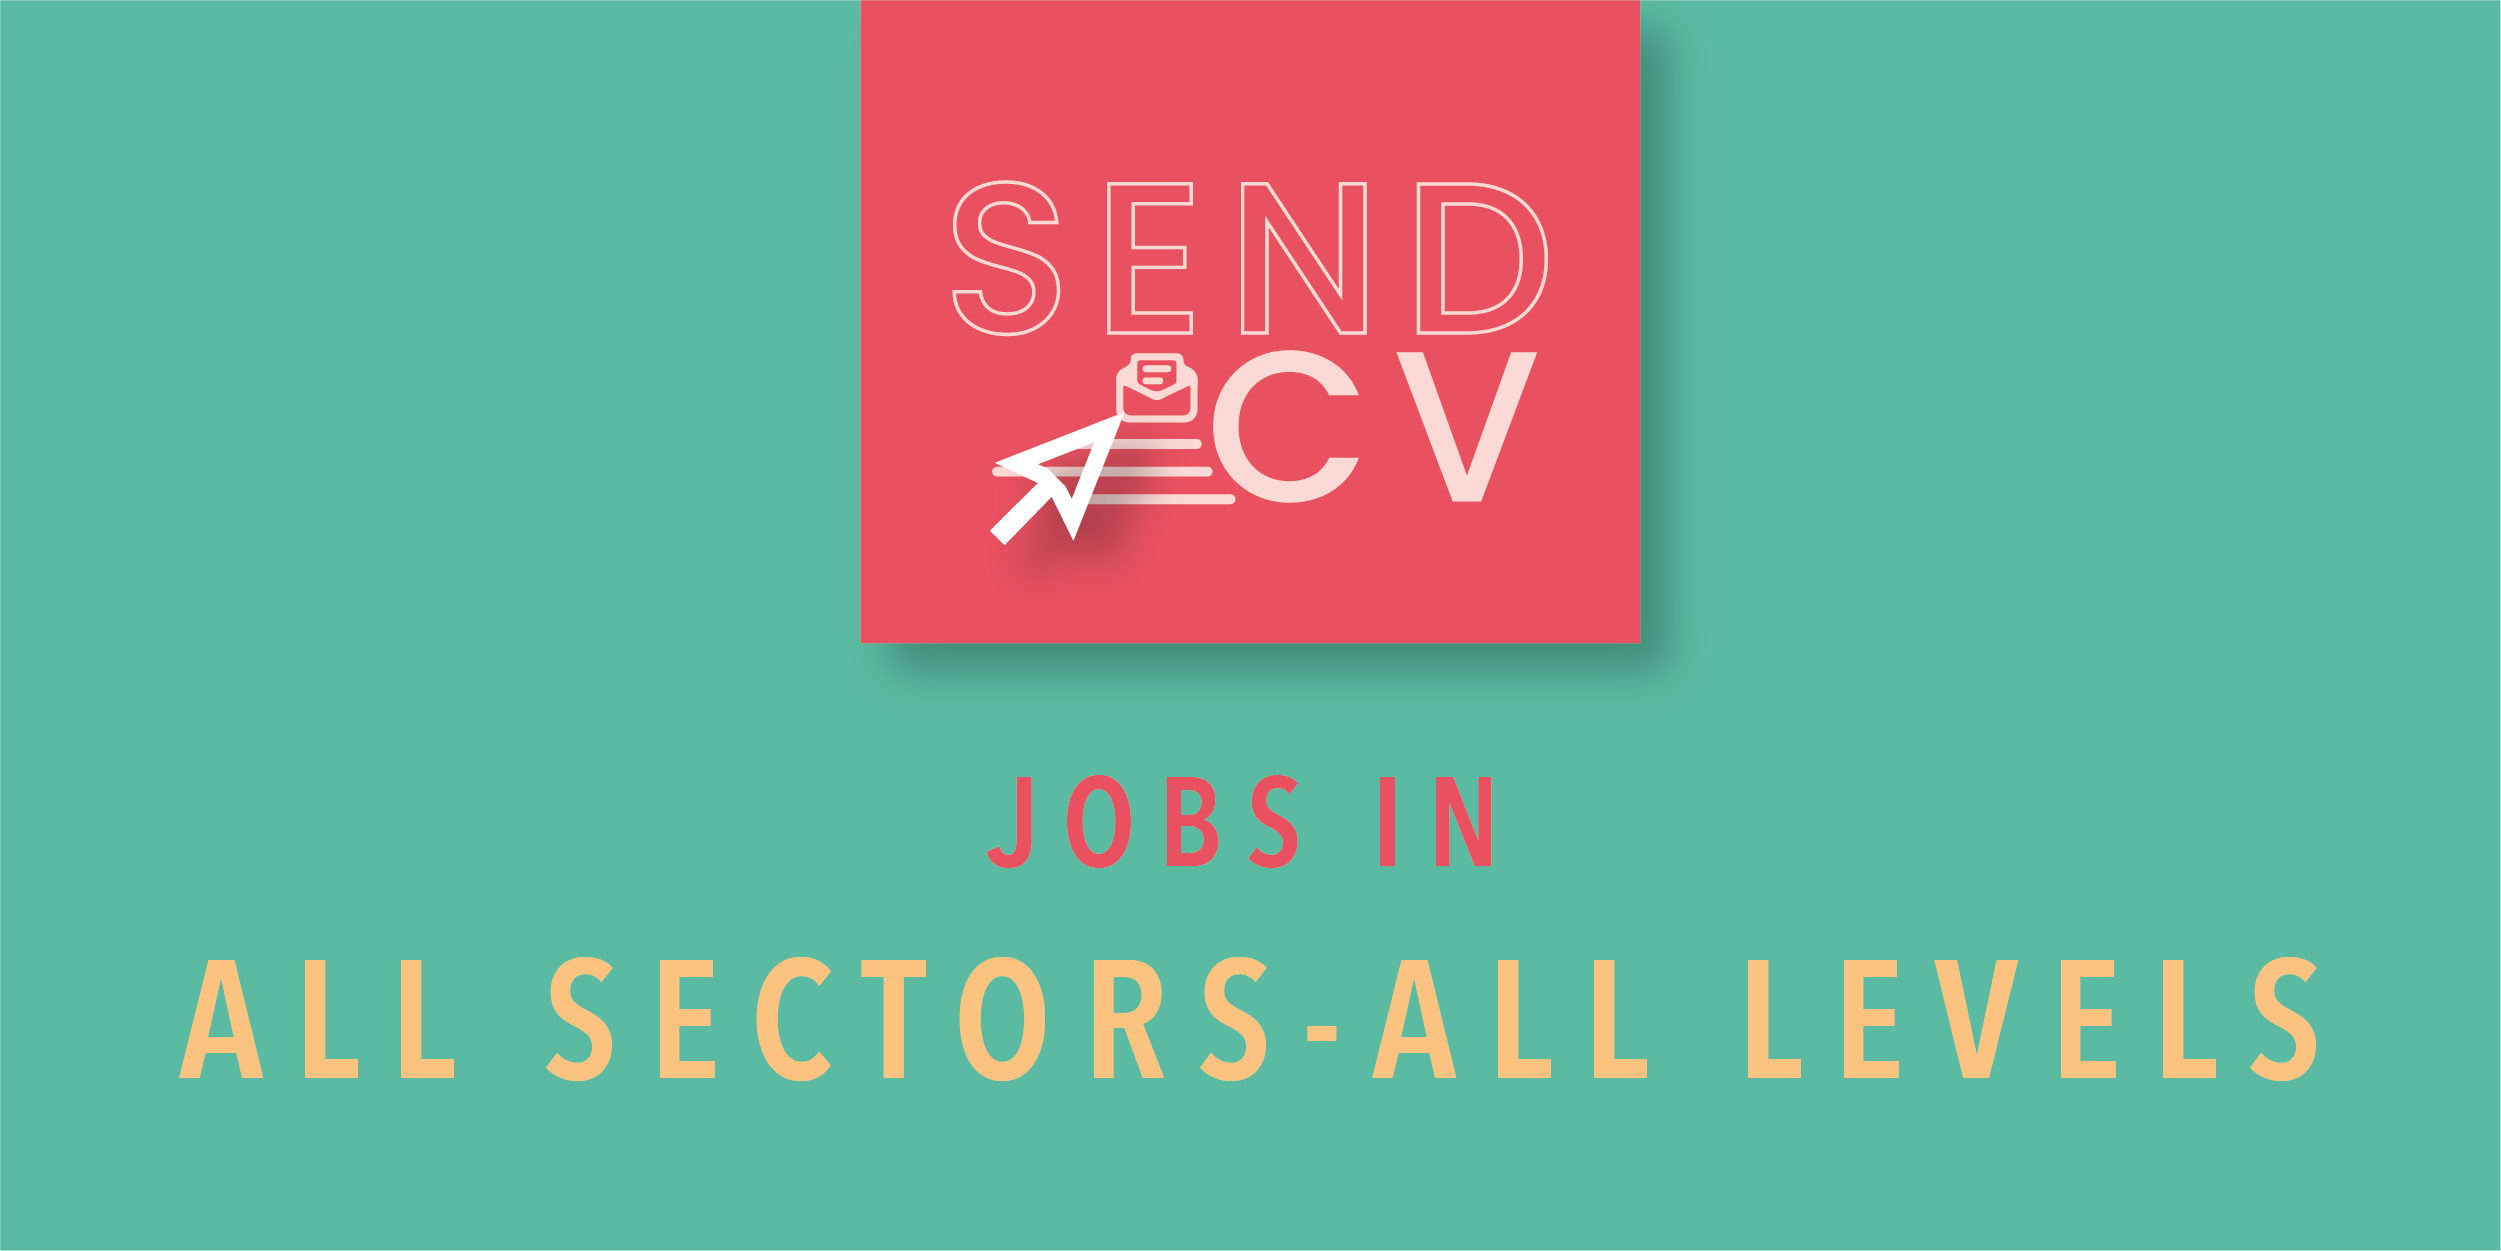 Jobs In All Sectors